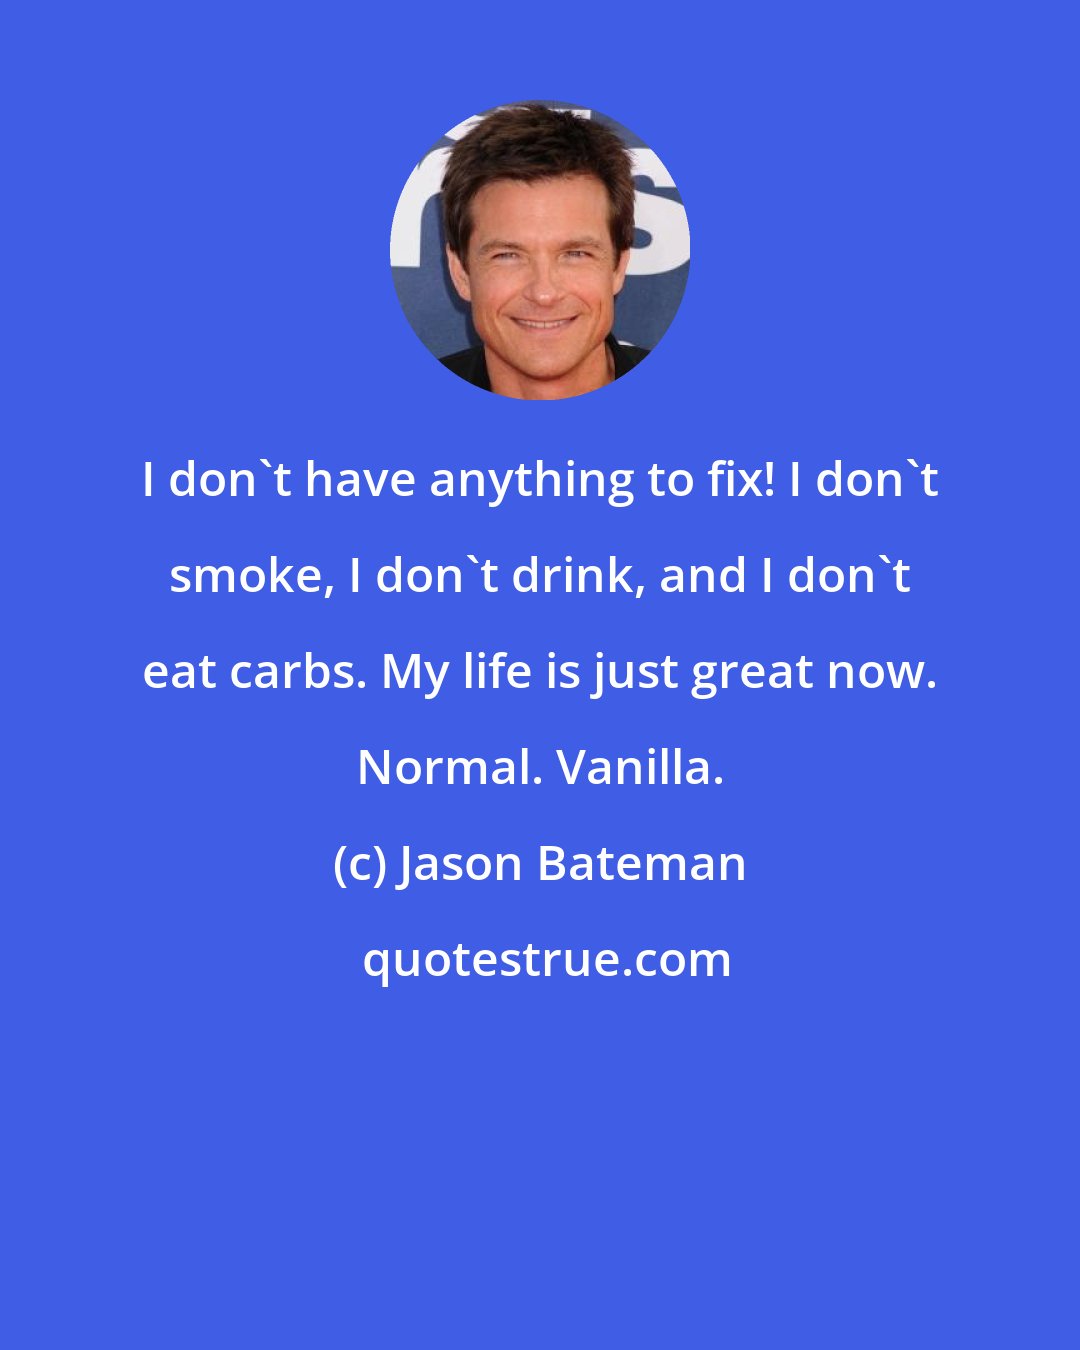 Jason Bateman: I don't have anything to fix! I don't smoke, I don't drink, and I don't eat carbs. My life is just great now. Normal. Vanilla.